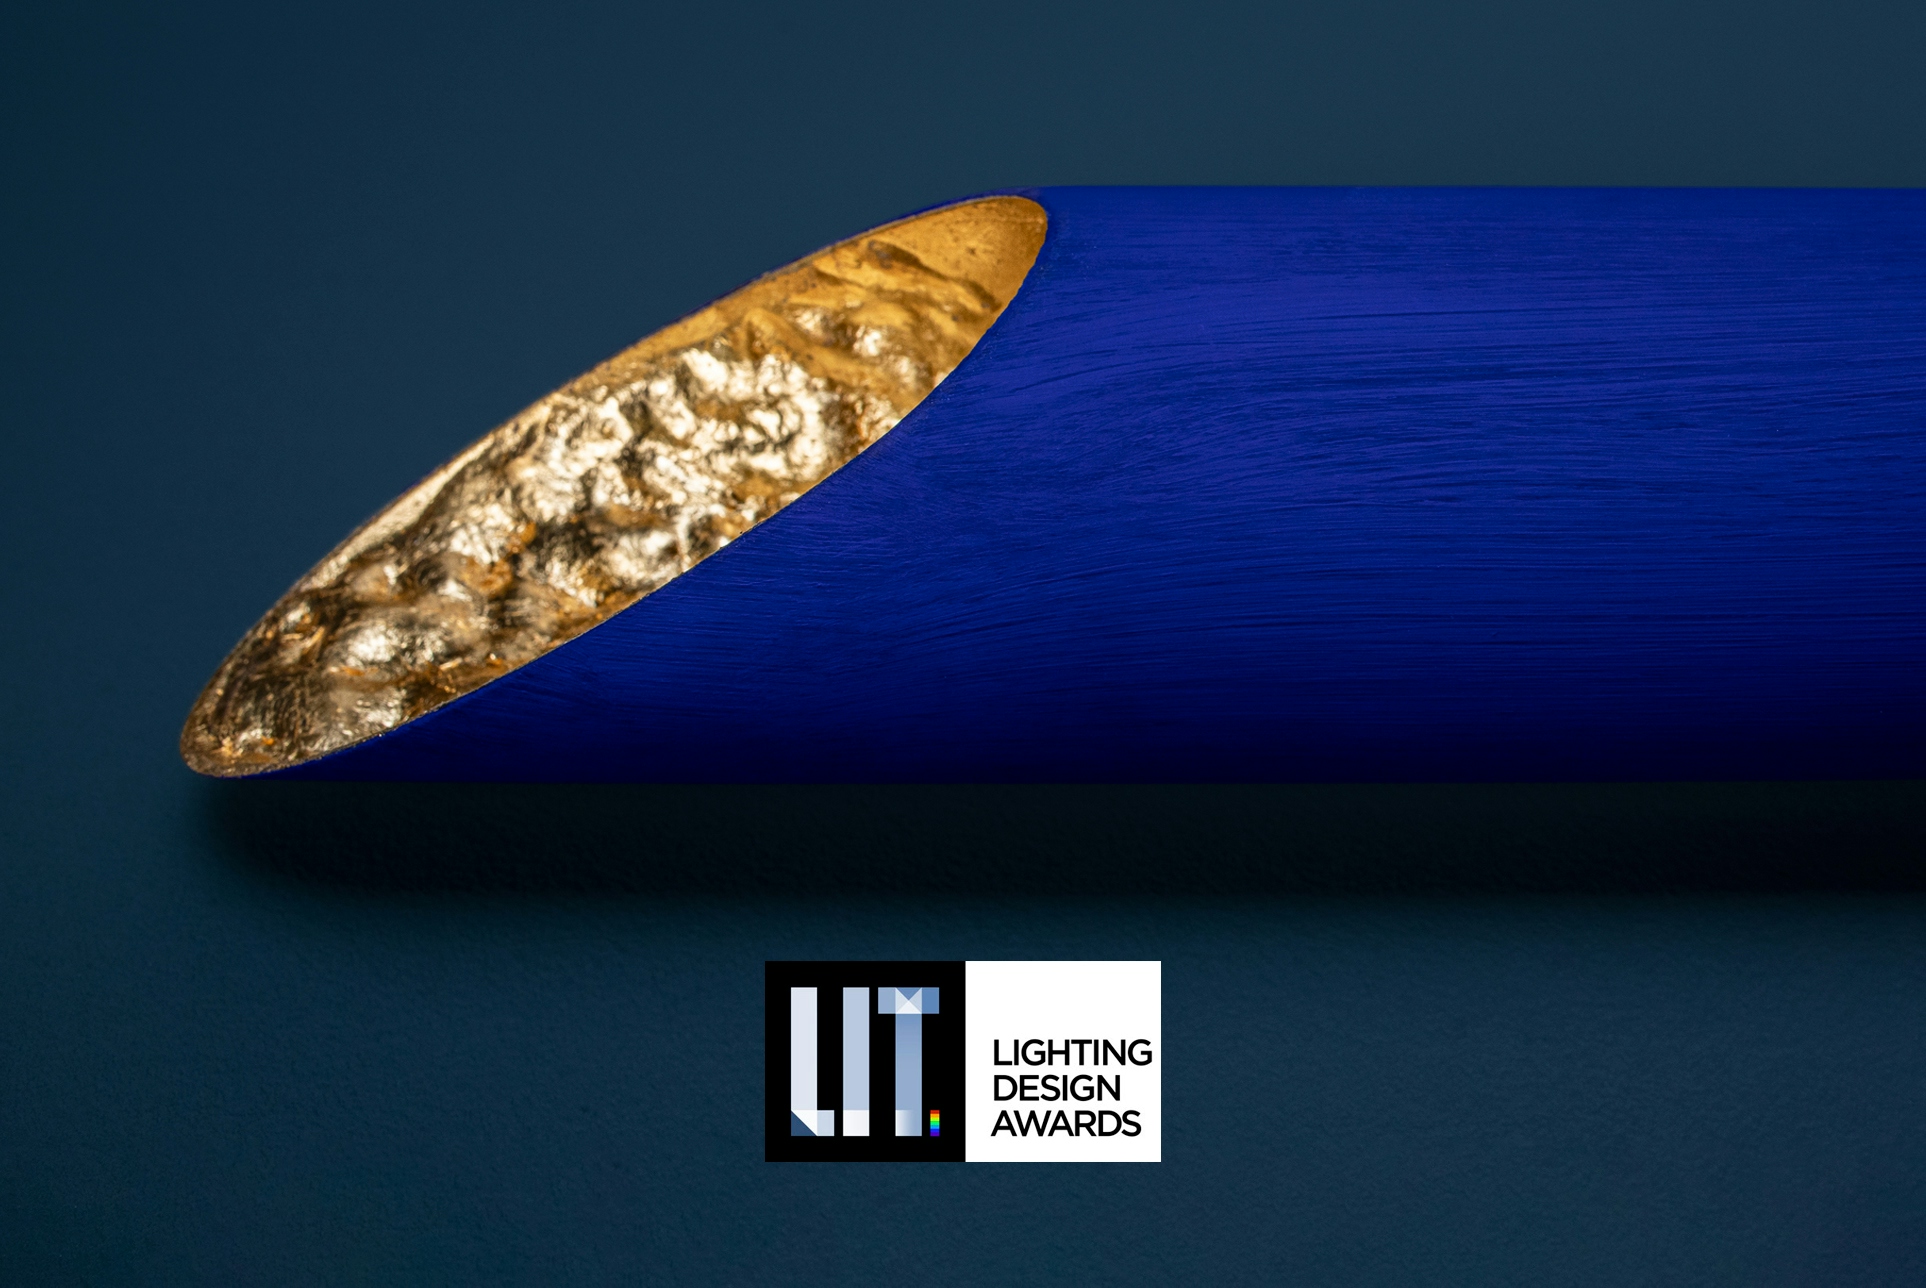 The ‘Cono&#8217; wall lamp wins the LIT Lighting Design Awards 2023